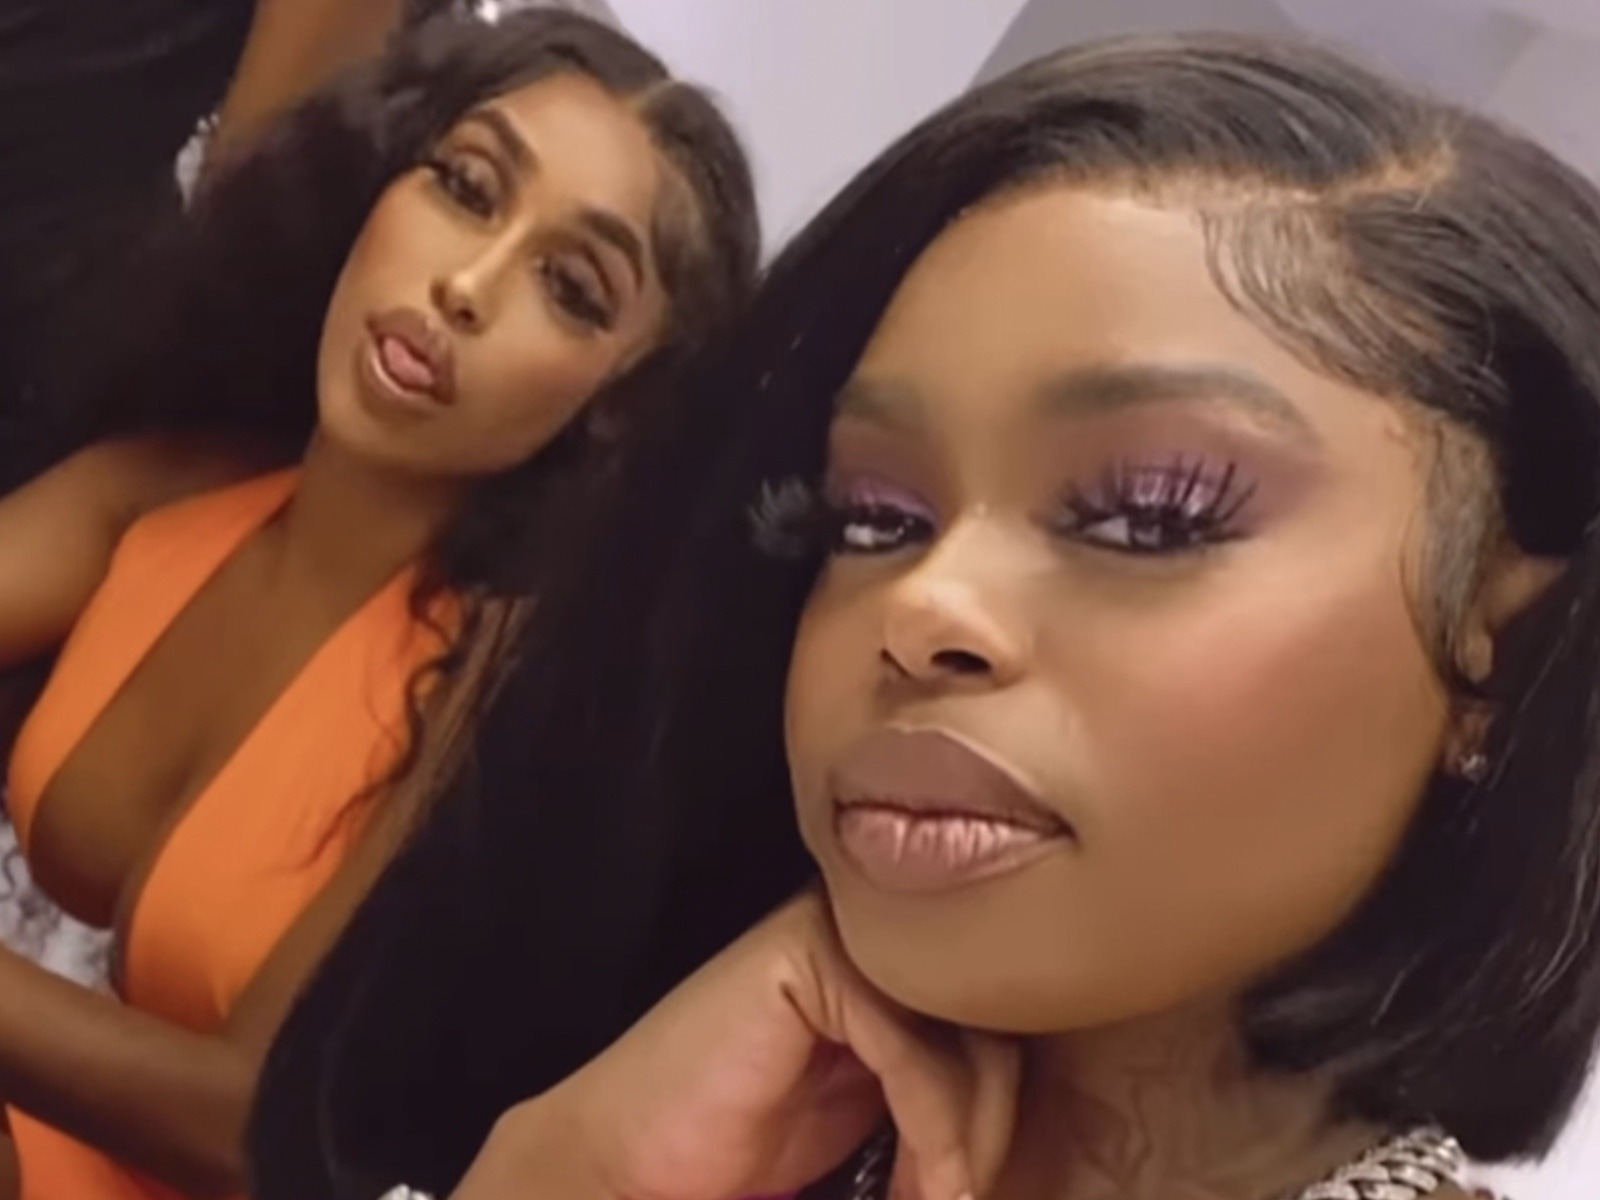 Dreezy Has The Time Of Her Life With Her Girlfriends  SOHH.com